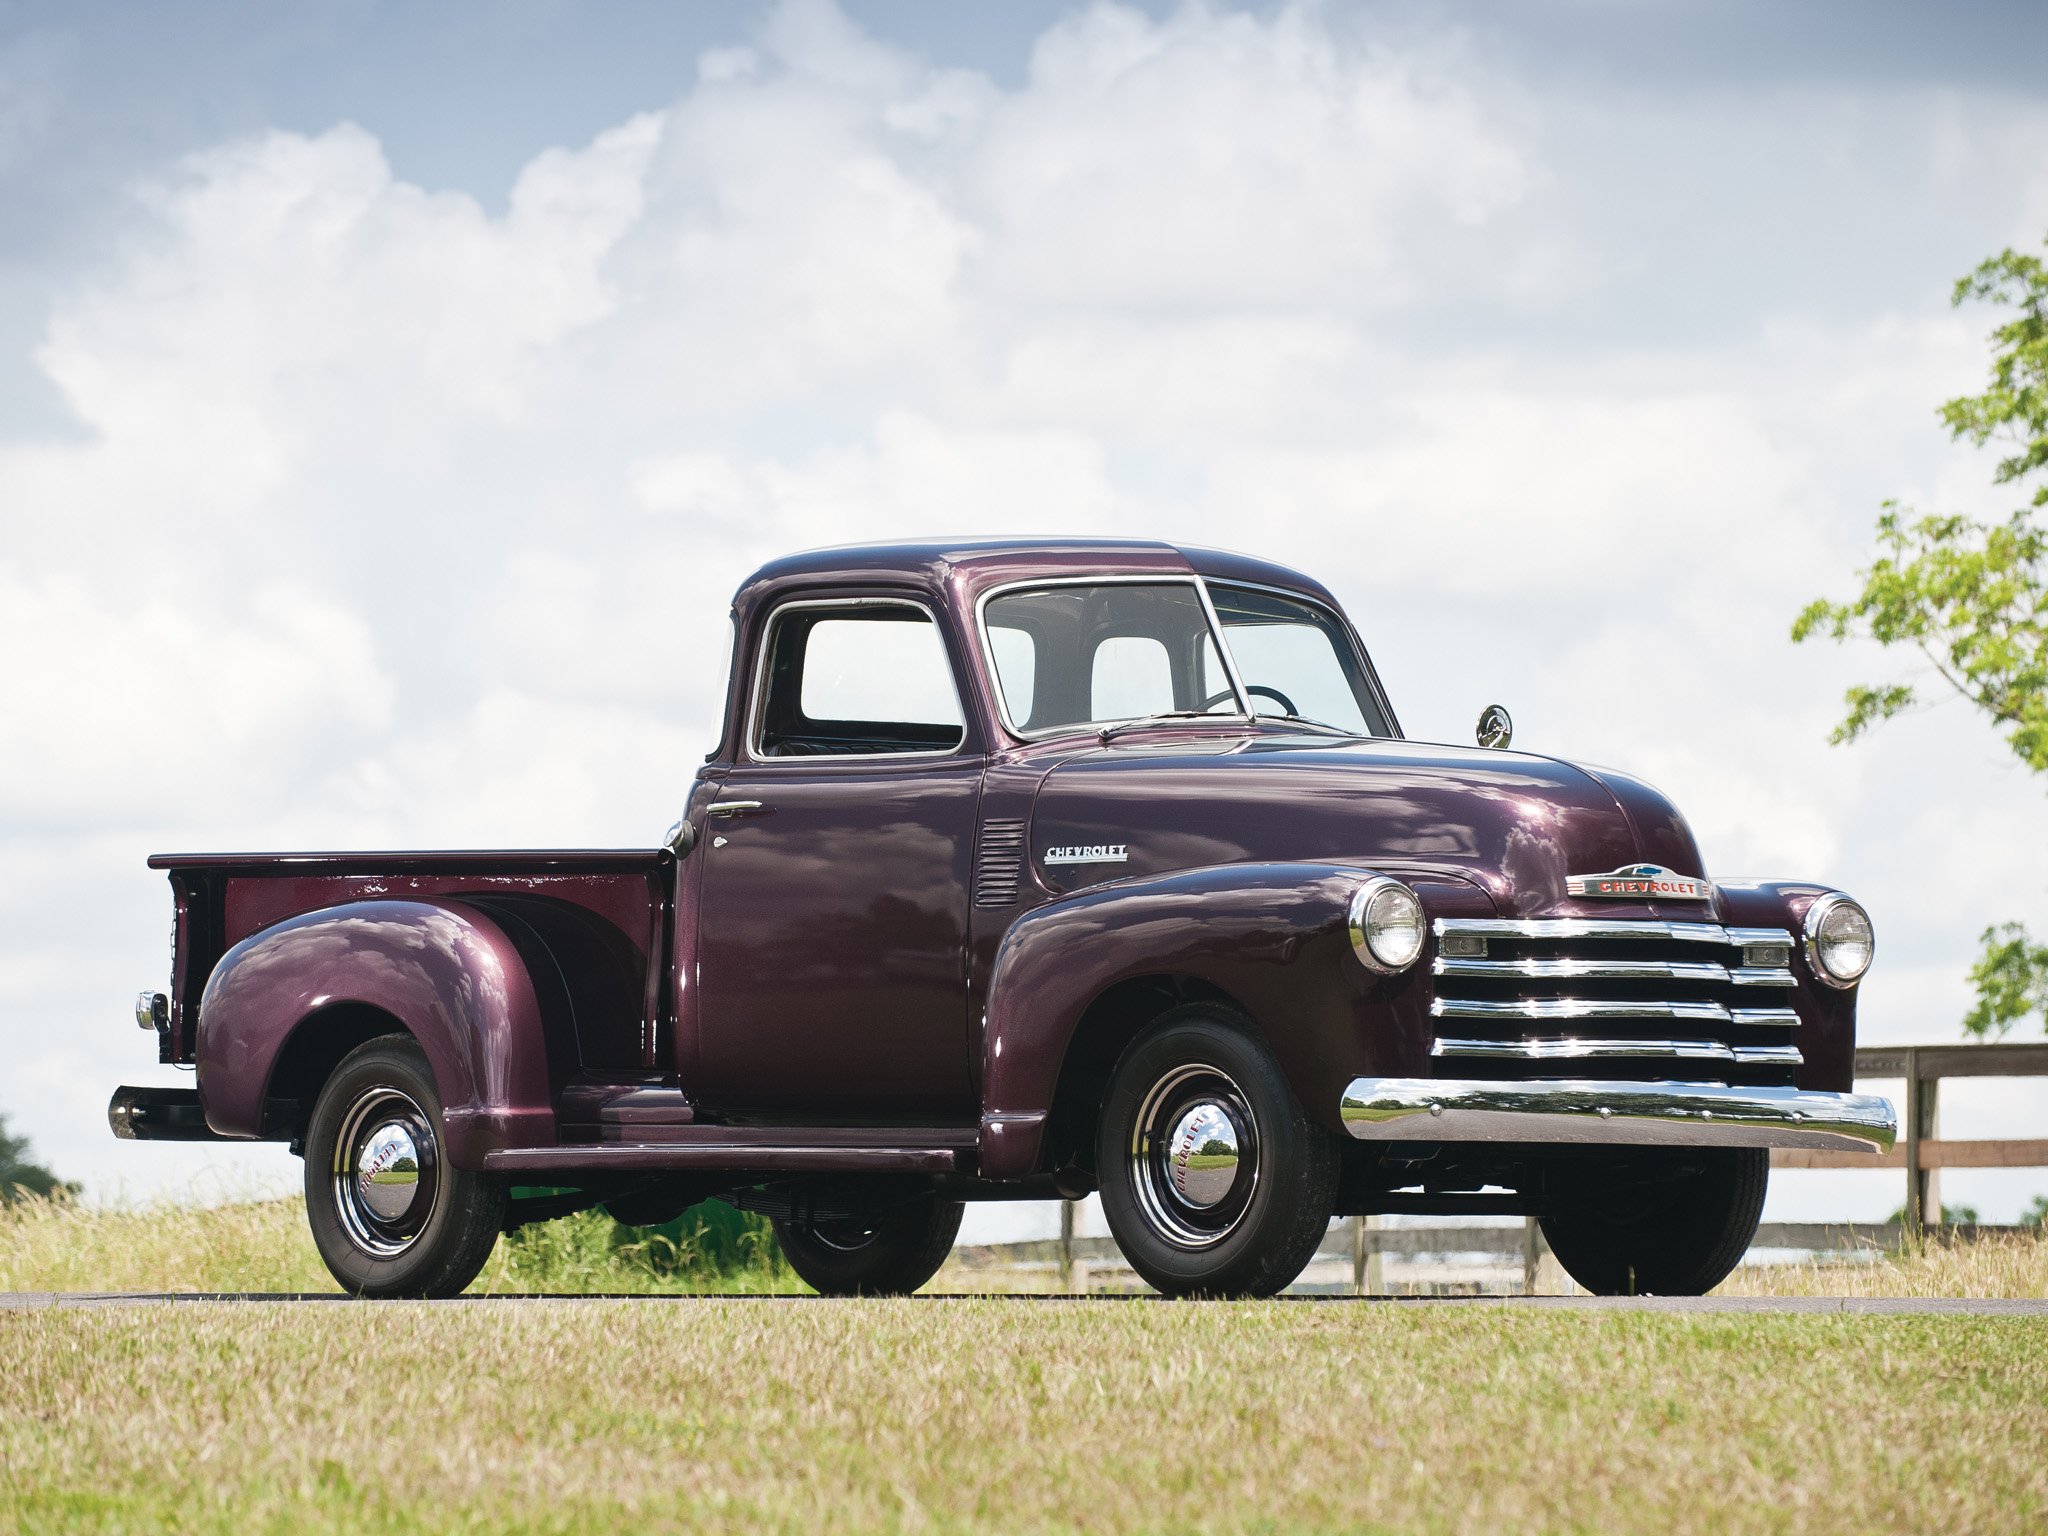 1947 Chevrolet Pickup 3100 Truck Classic Cars Wallpapers Hd